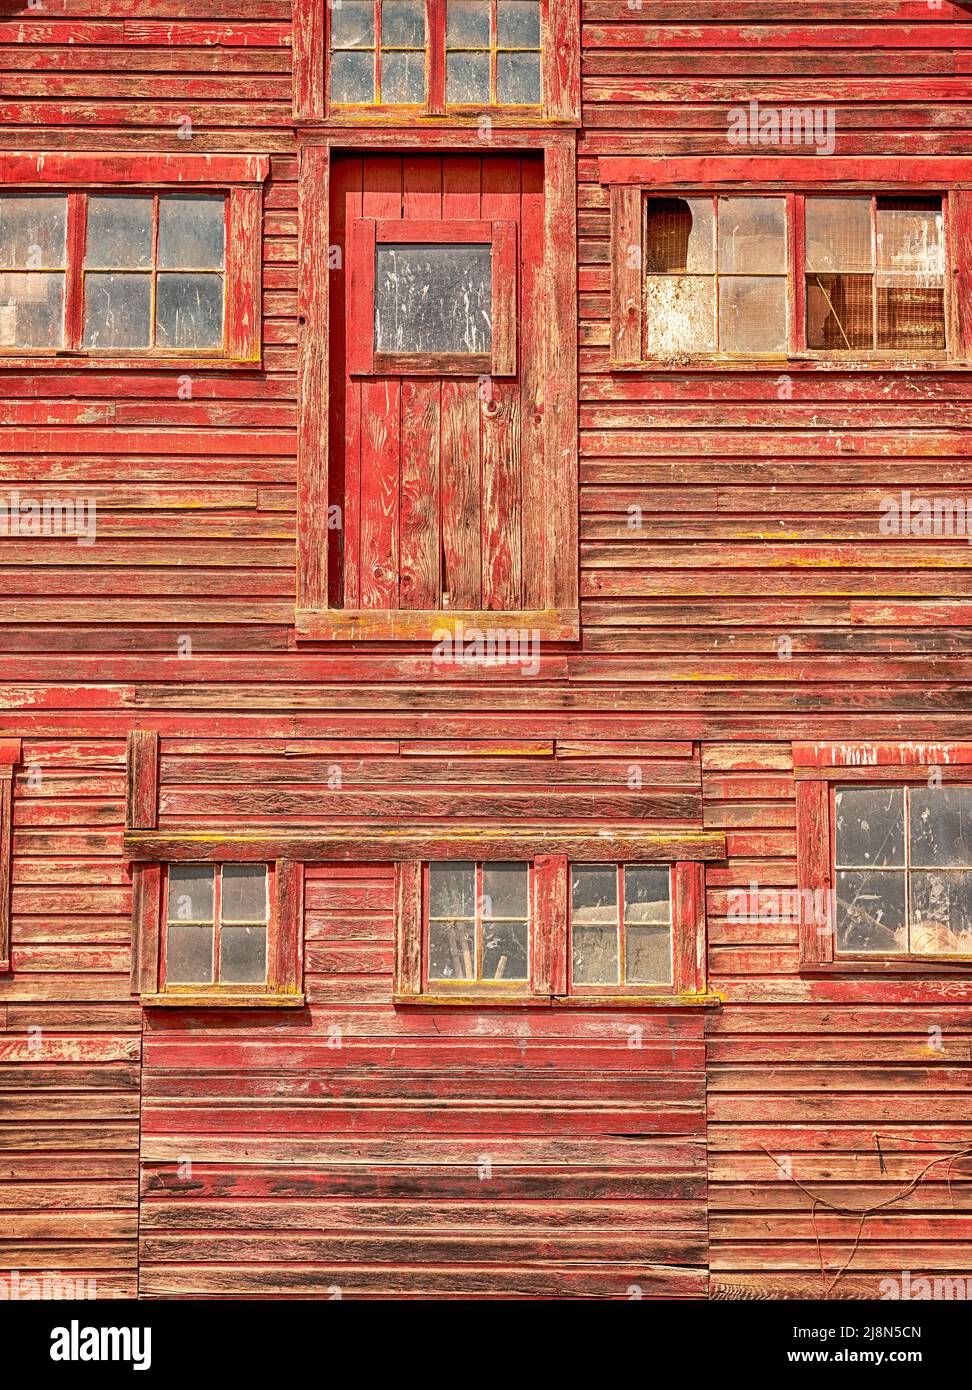 The exterior wall of a barn in Oregon appears to have a patchwork of doors and windows. Stock Photo